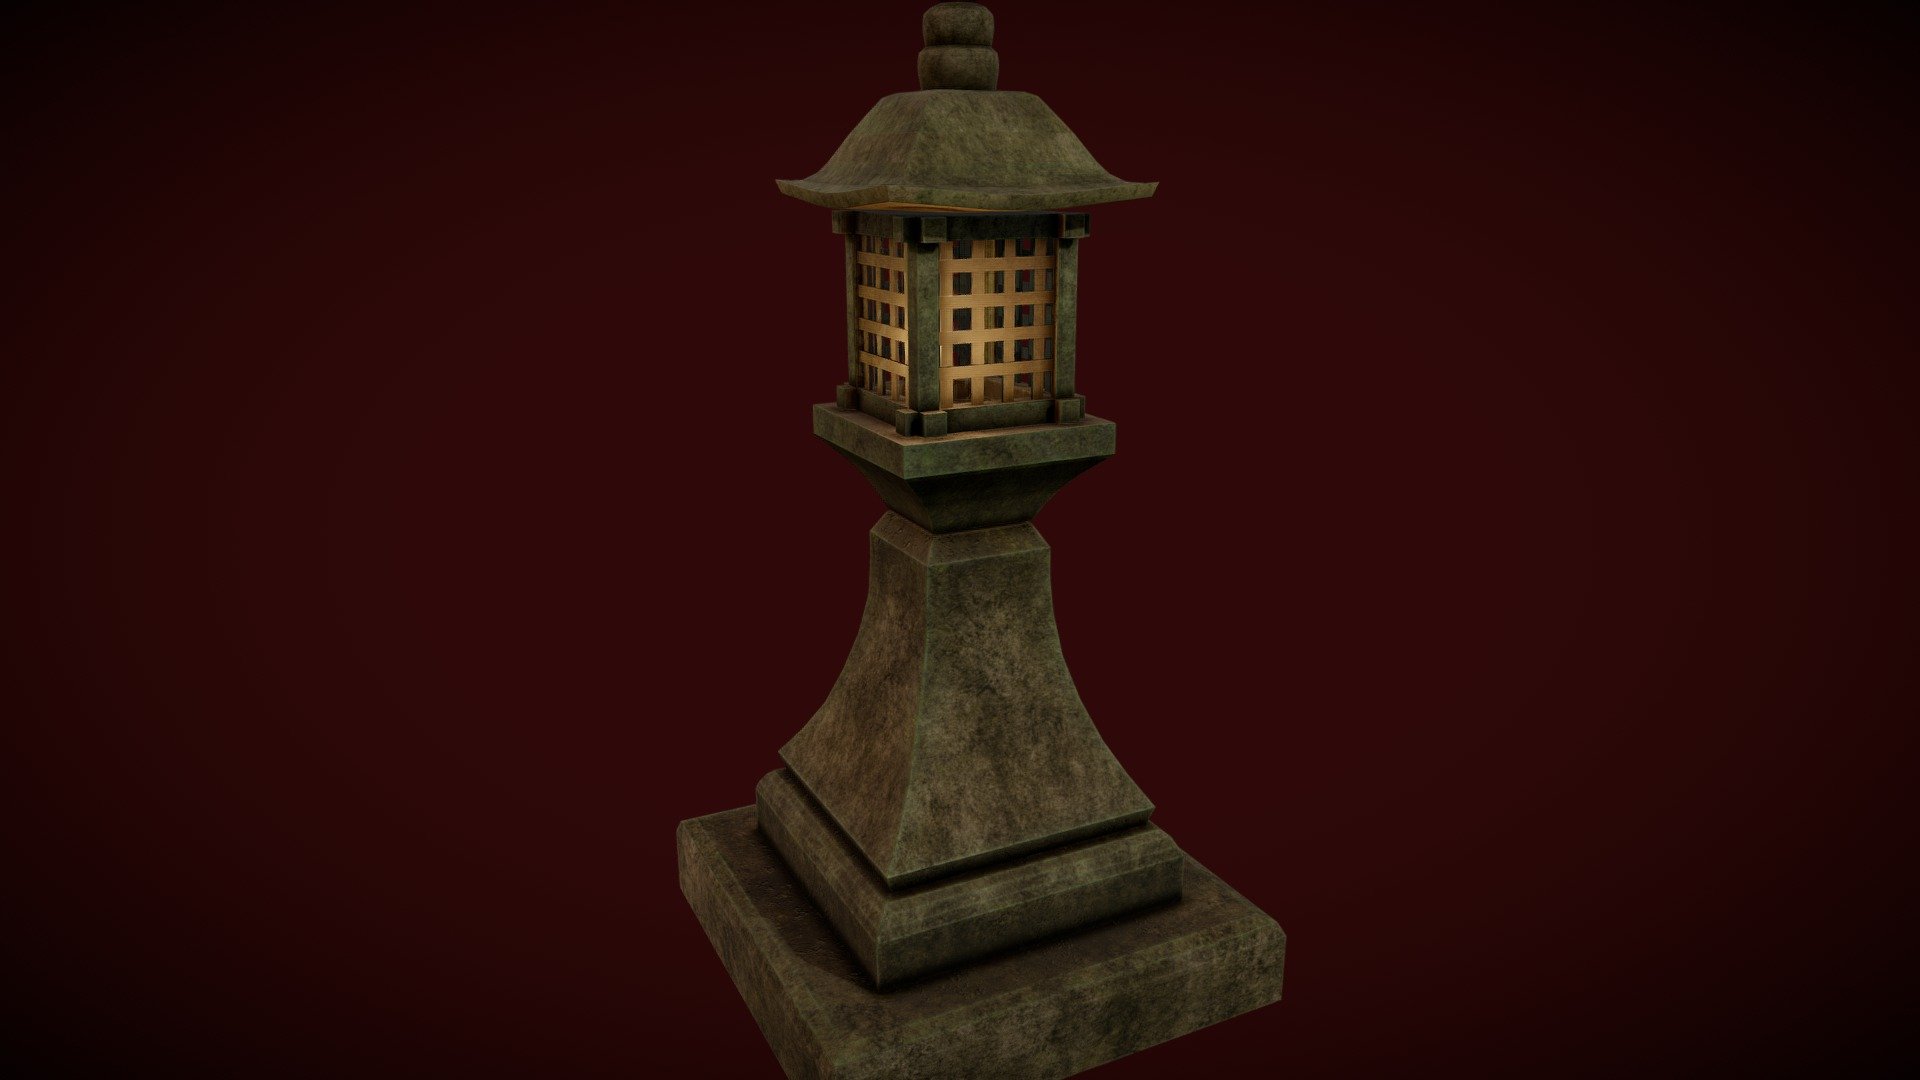 In Japan, a tōrō (灯籠 or 灯篭, 灯楼, light basket, light tower) is a traditional lantern made of stone, wood, or metal. In Japan, tōrō were originally used only in Buddhist temples, where they lined and illuminated paths. Lit lanterns were then considered an offering to Buddha.

An old and eroded Japanese stone lantern(tōrō) . Modelled in Blender and textured in Substance painter 3d model